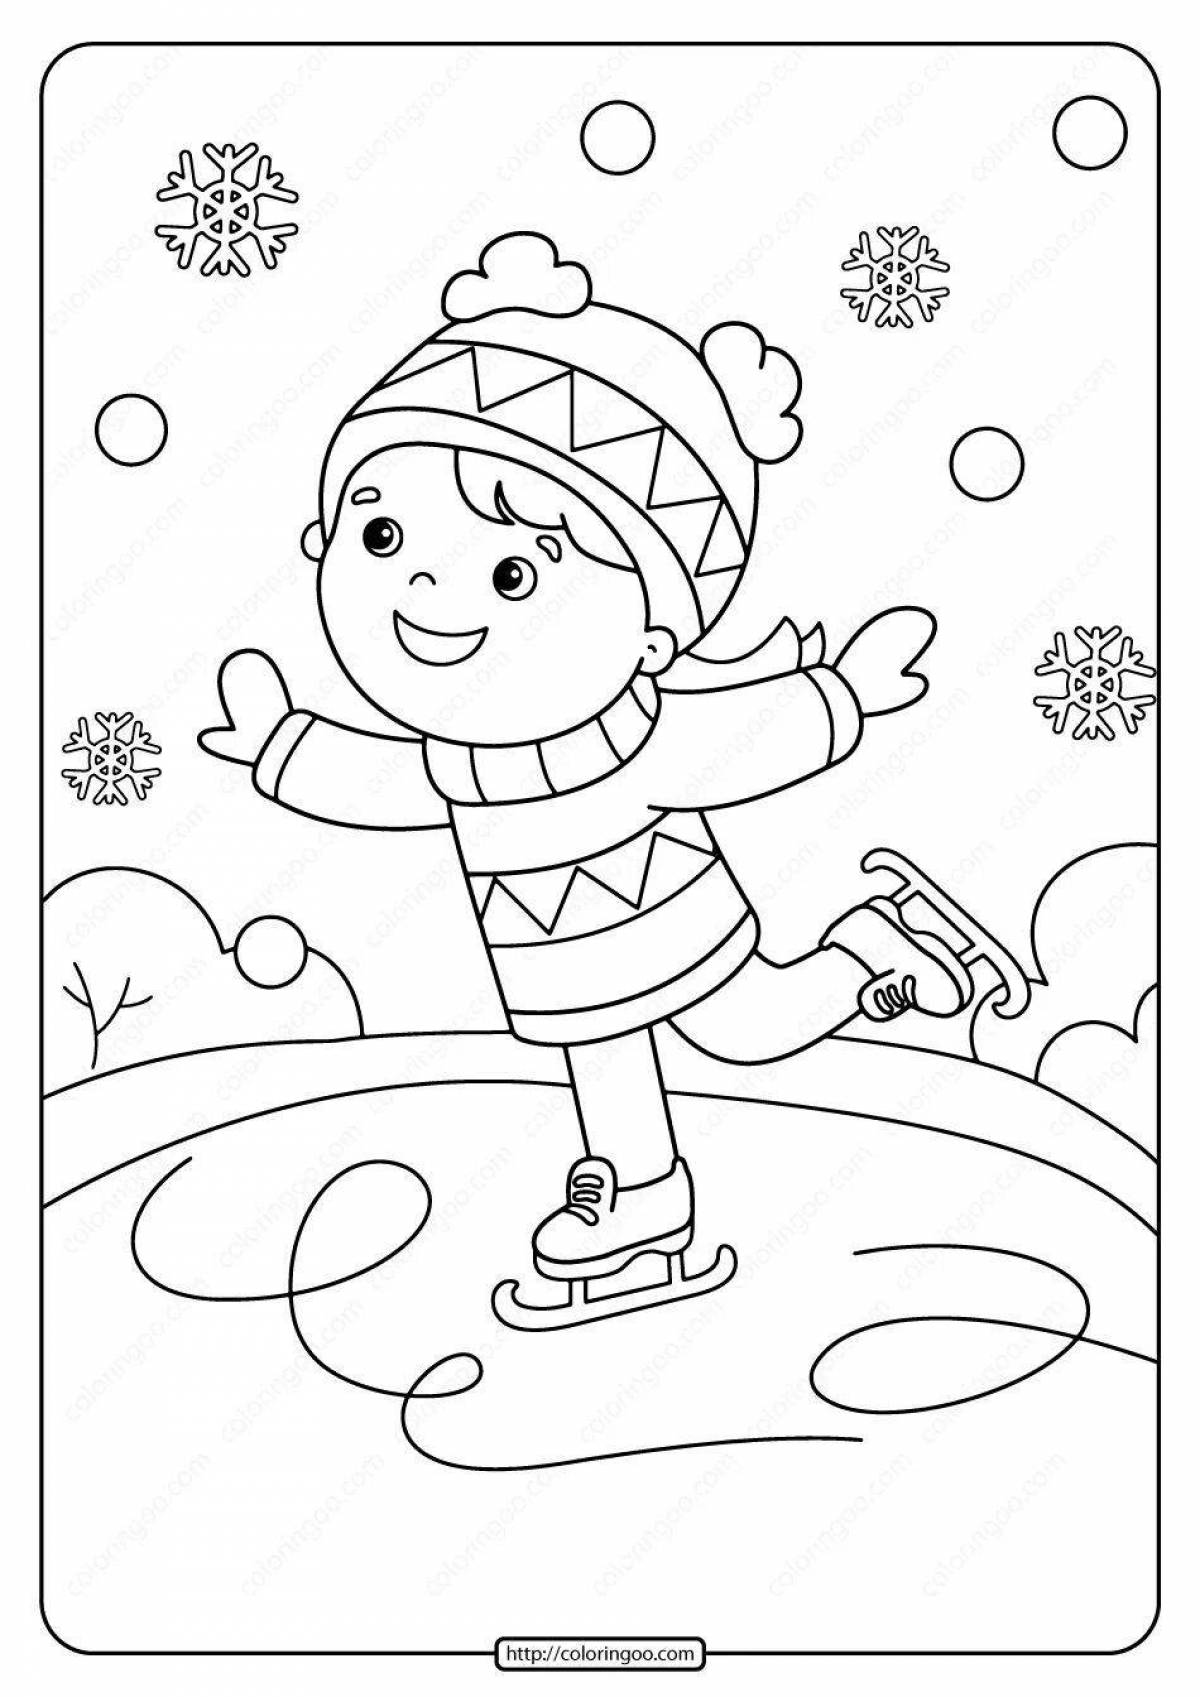 Exciting winter sports coloring book